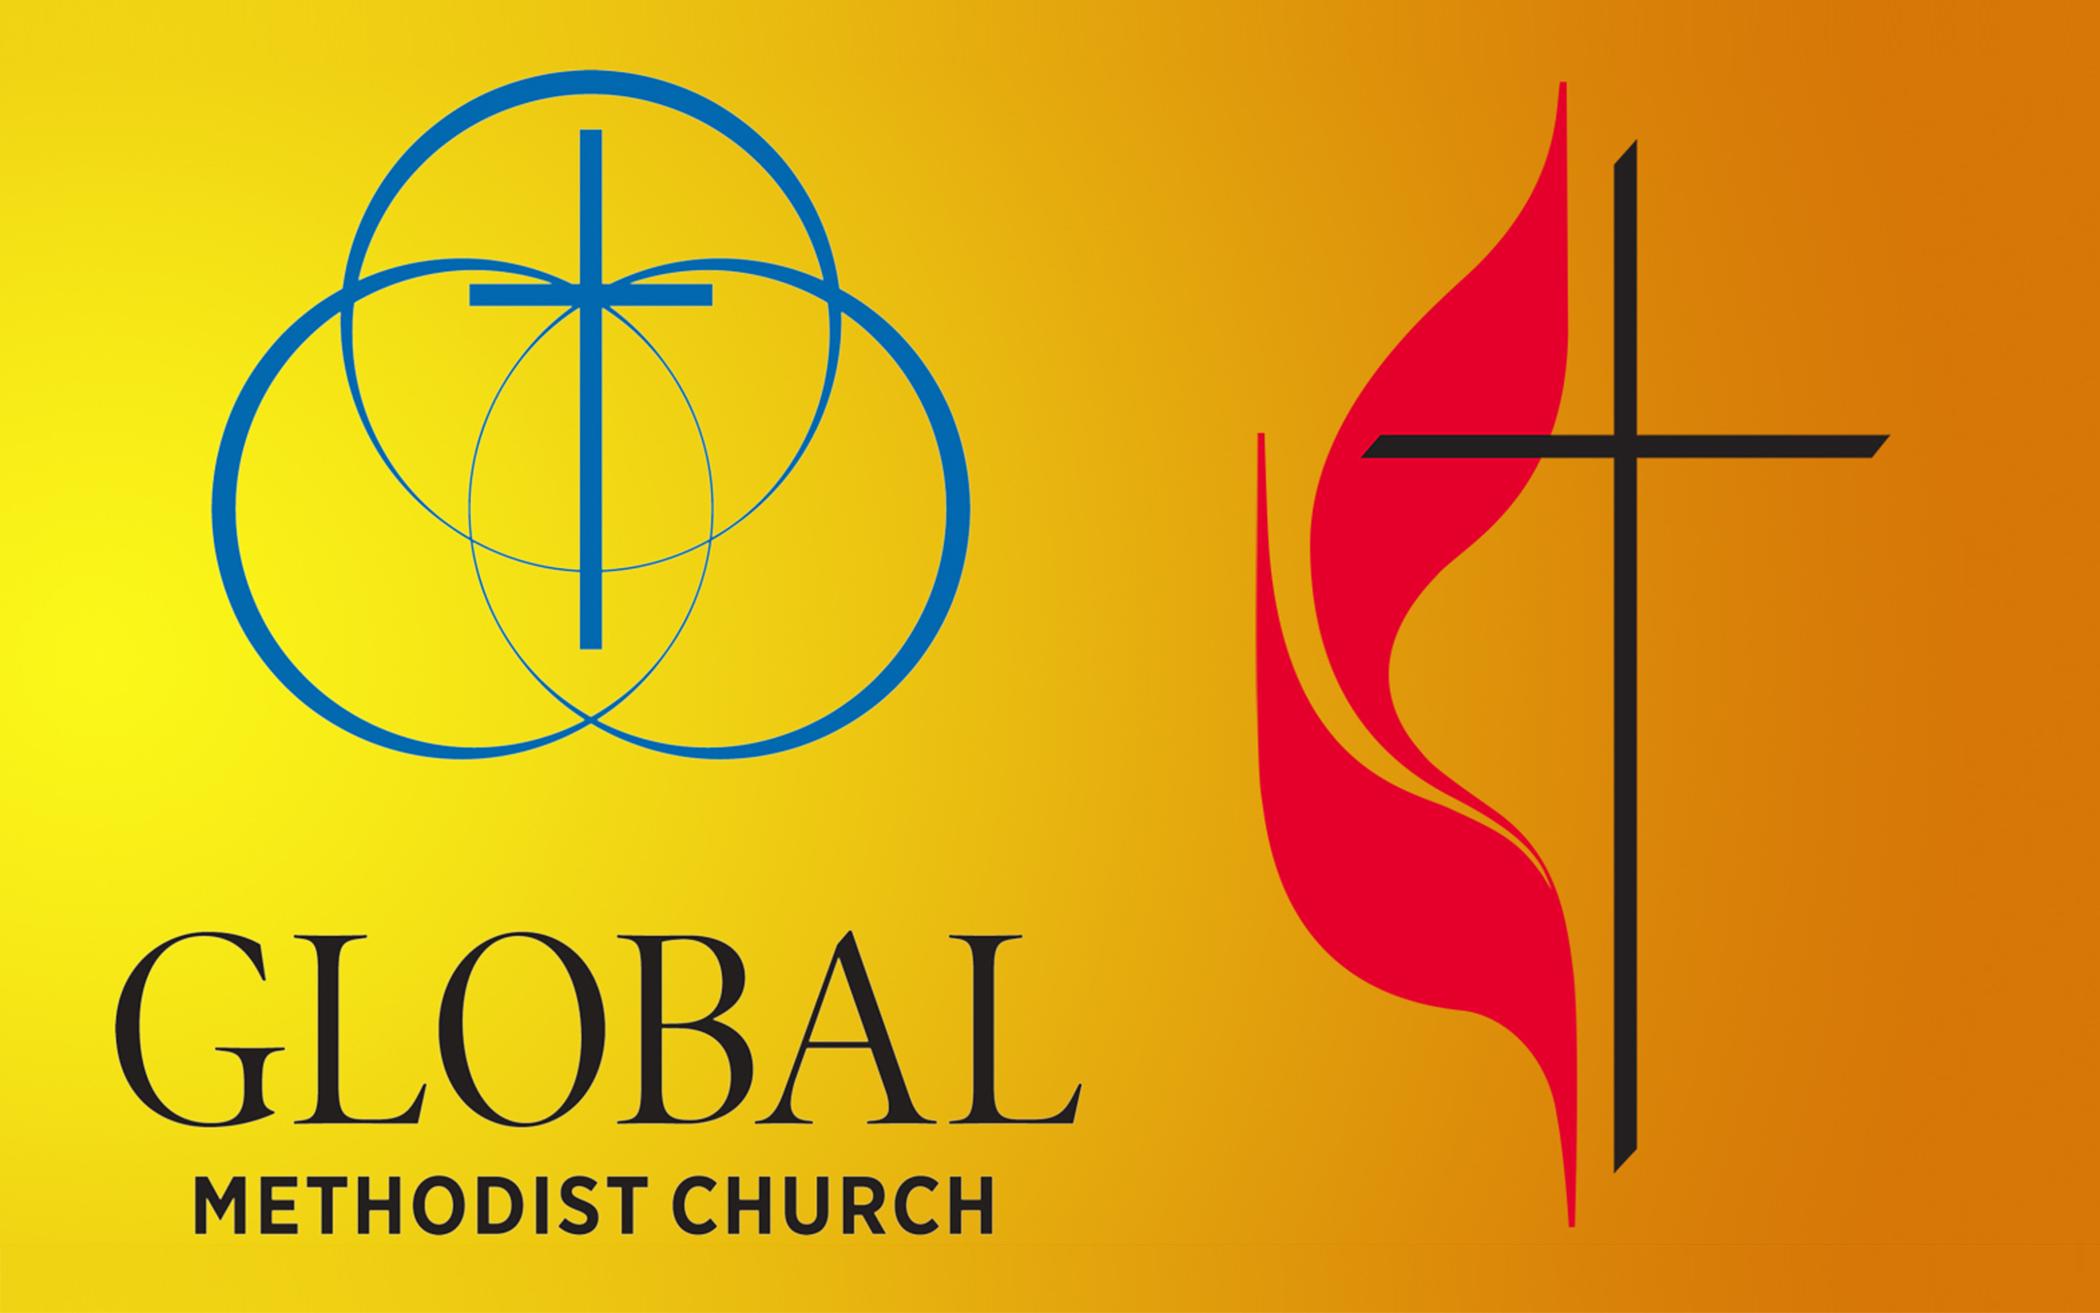 Global Methodist Church, Conservative Offshoot of United Methodists, Launches